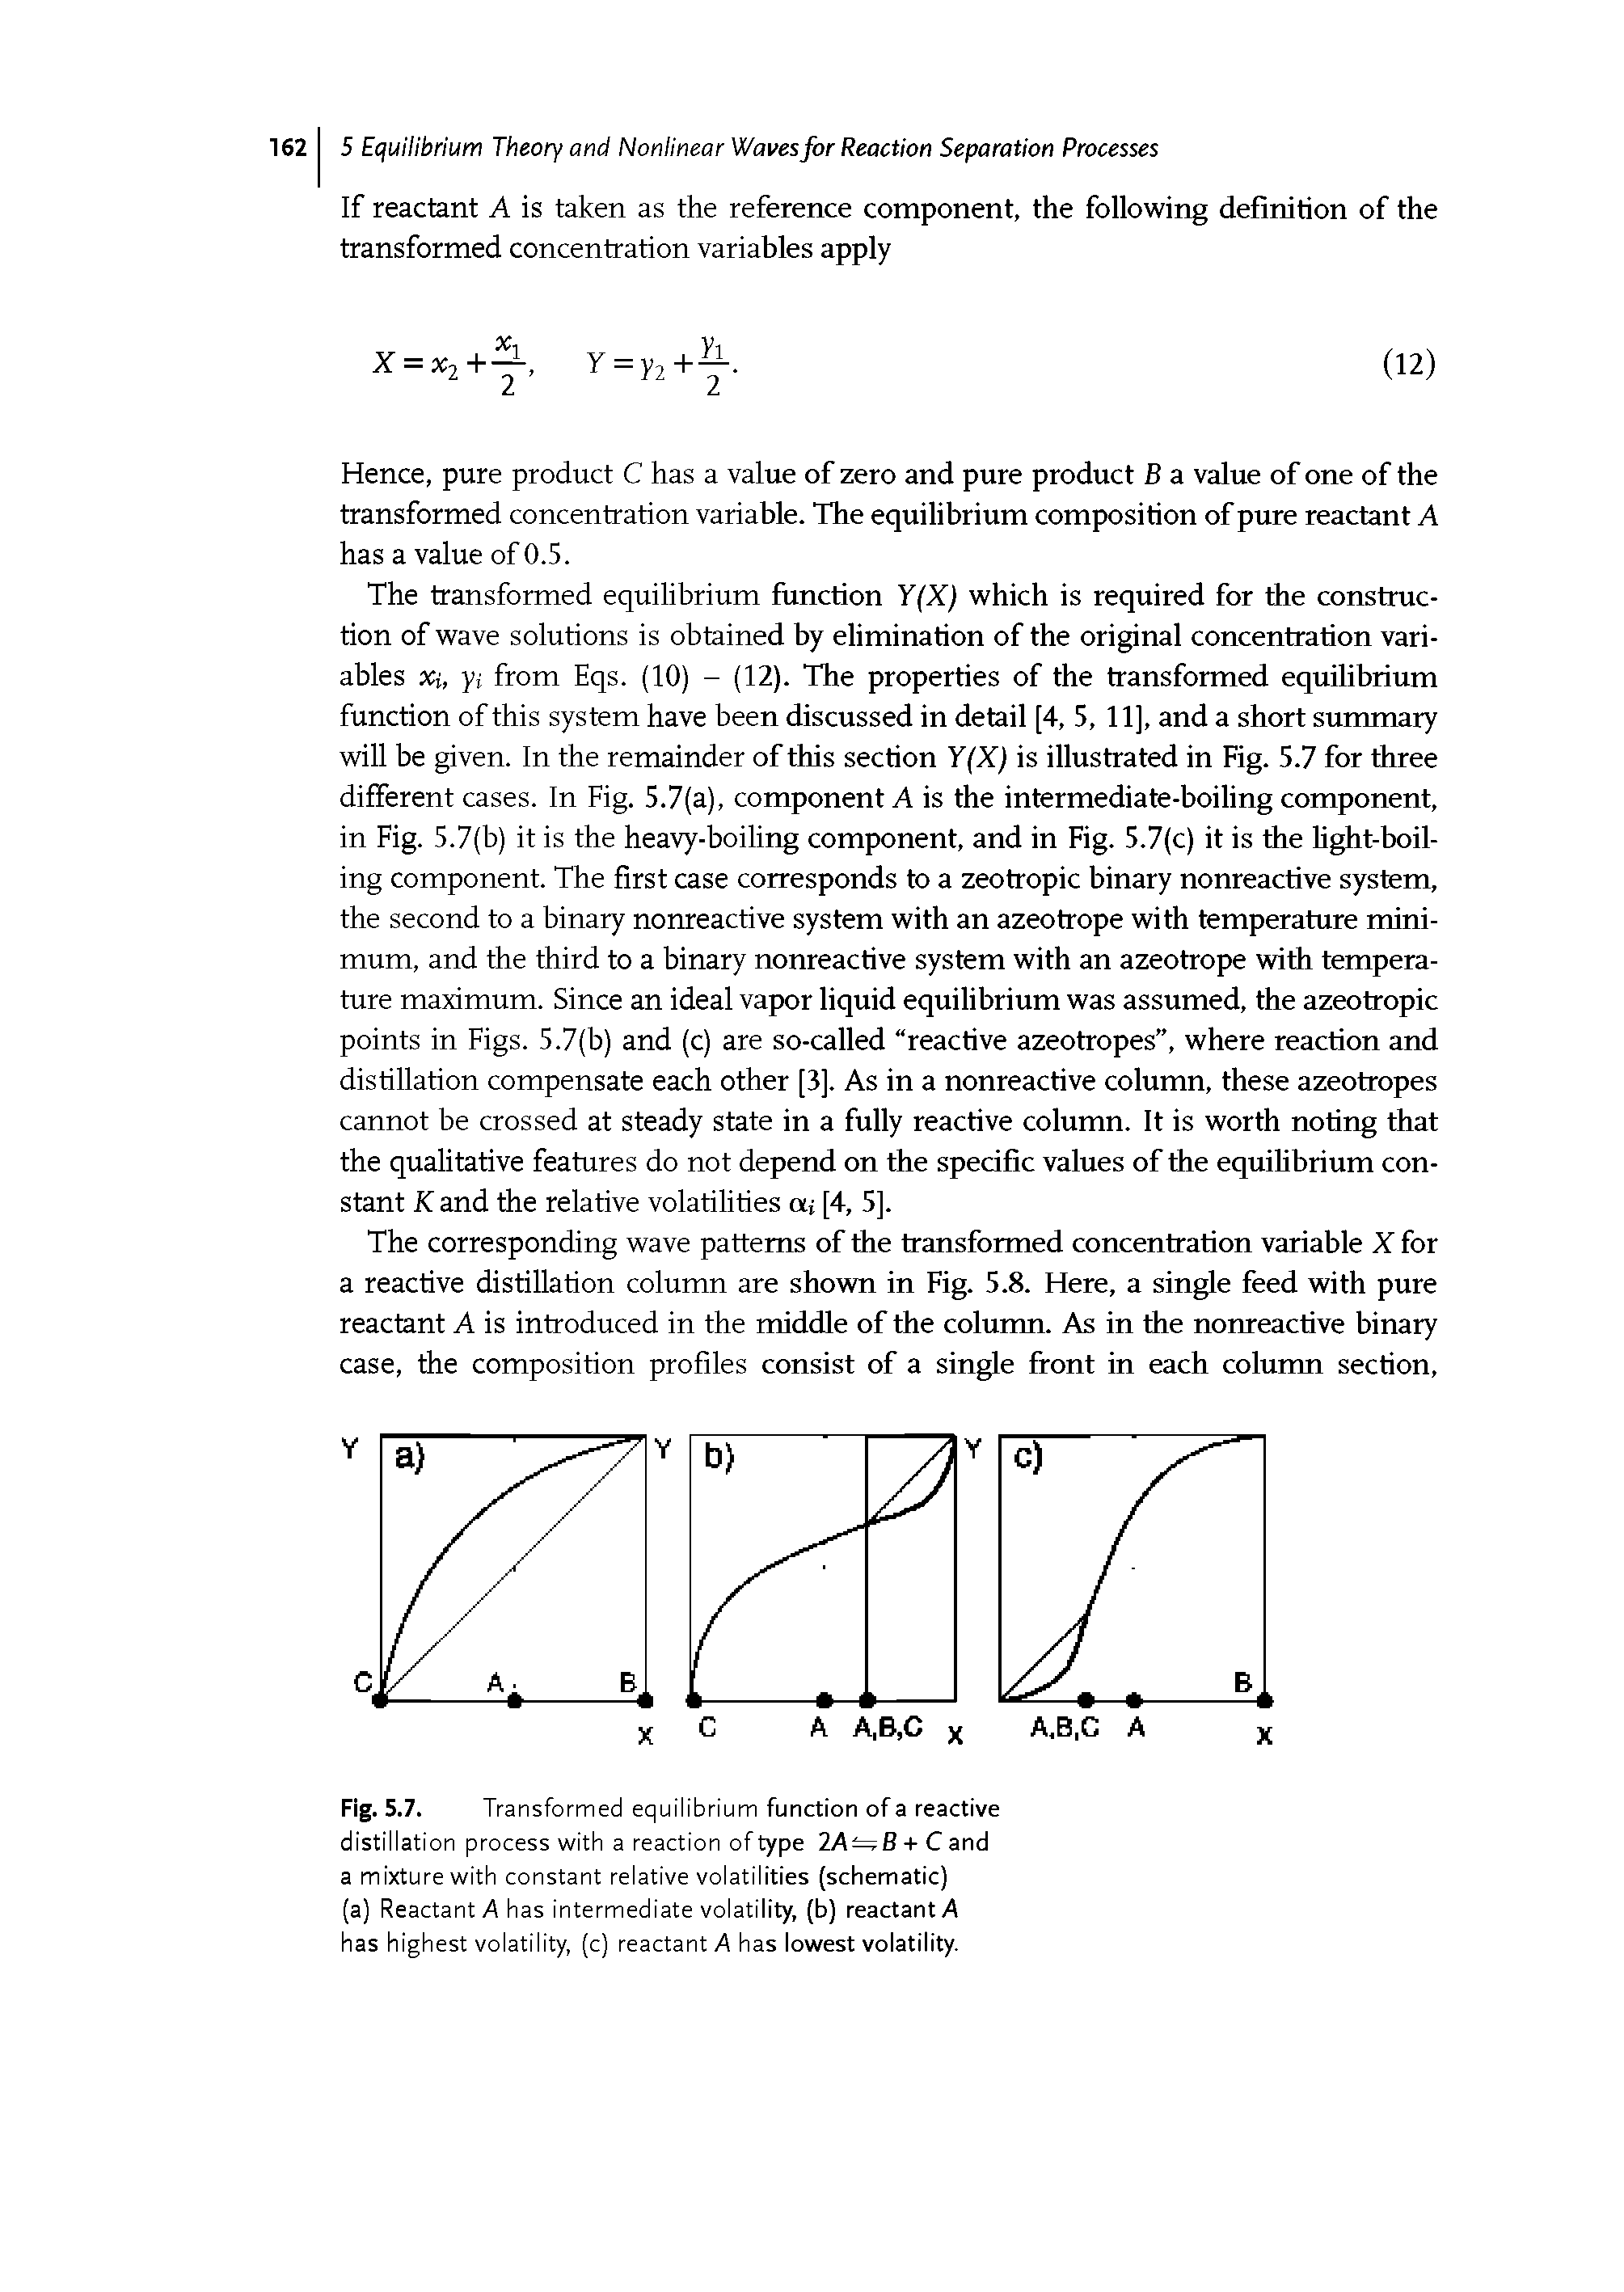 Fig. 5.7. Transformed equilibrium function of a reactive distillation process with a reaction of type 2 A B + C and a mixture with constant relative volatilities (schematic)...